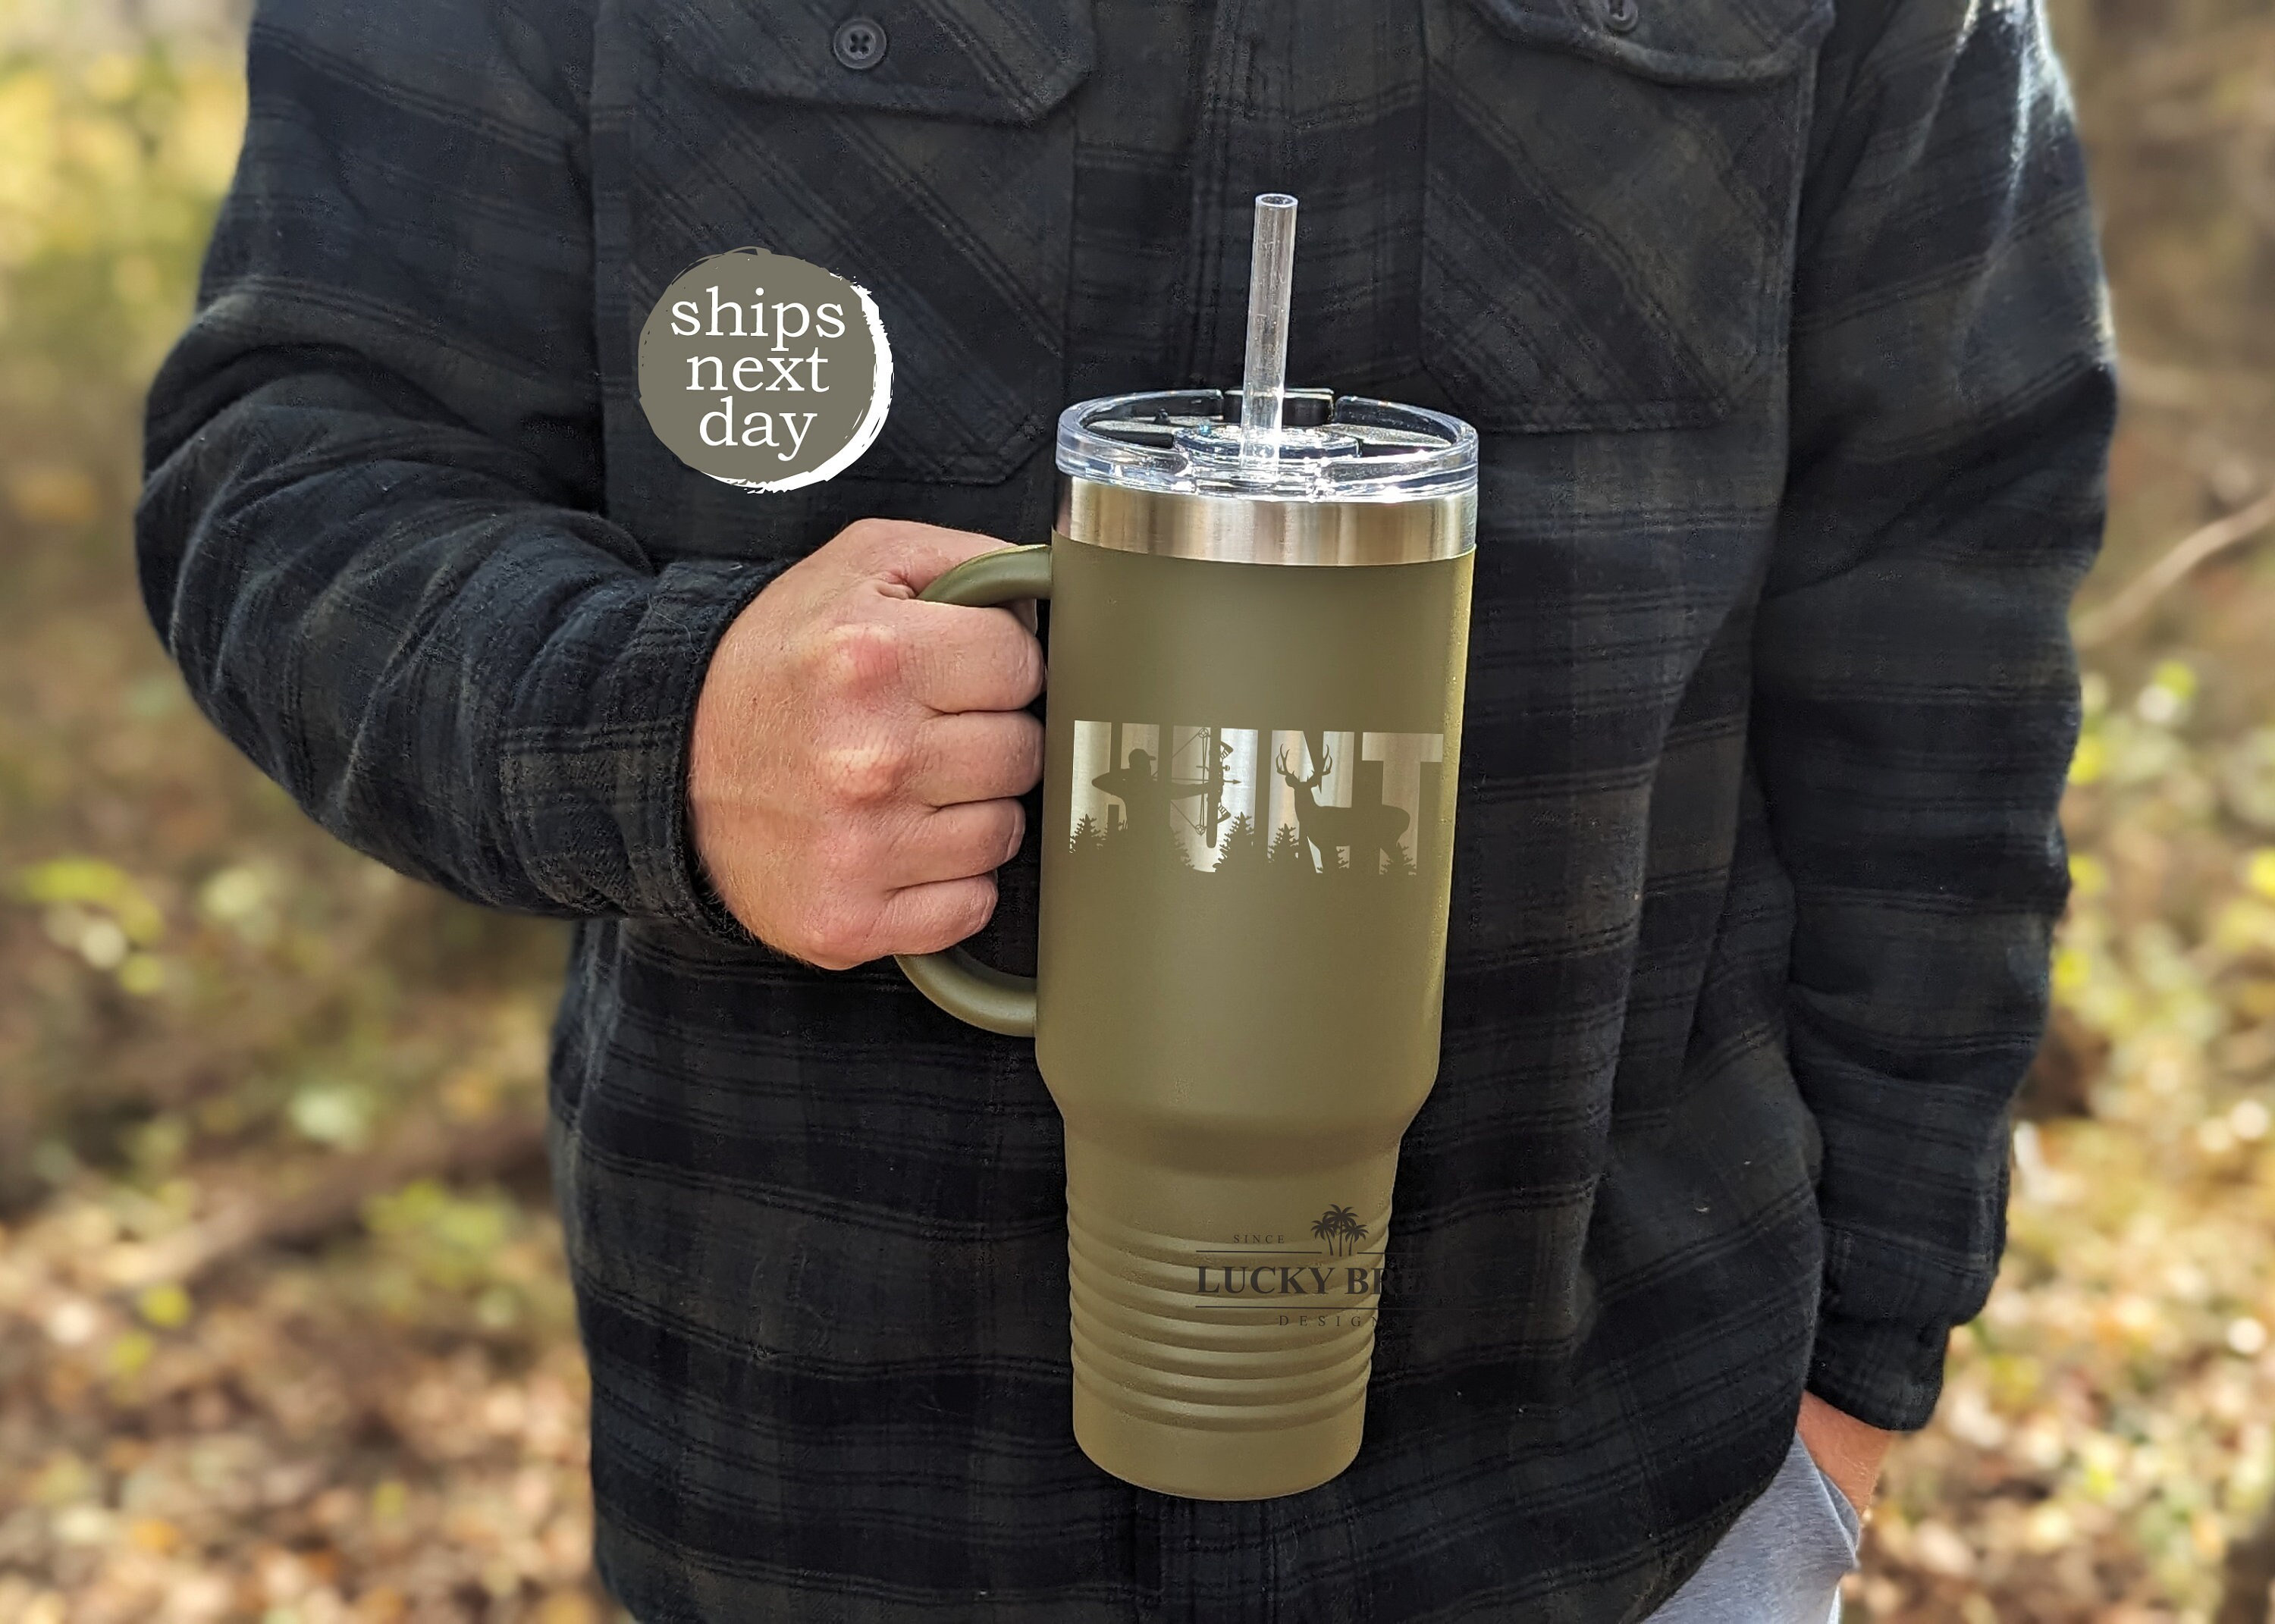 Ceovfoi 40 oz Camo Tumbler with Handle Lid and Straw, Hunting Gifts for Men Women,Camo Tumbler Travel Coffee Cup Mug Water Botter